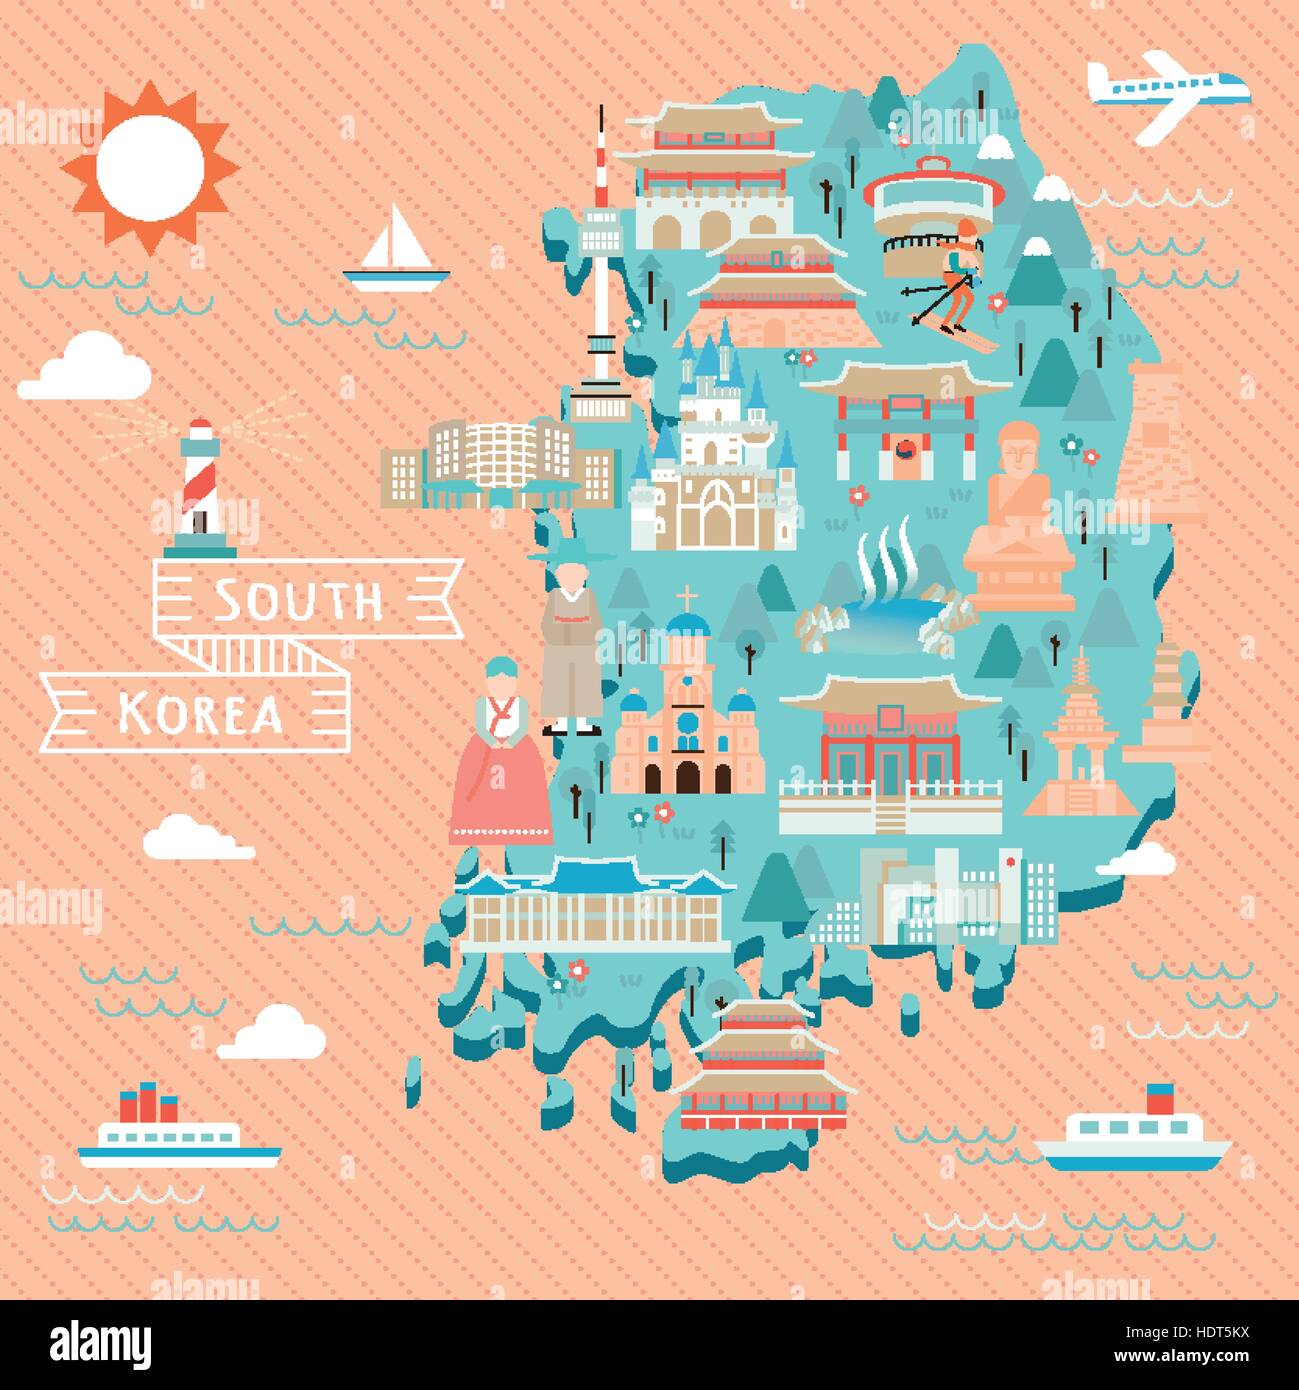 lovely South Korea travel map in flat style Stock Vector